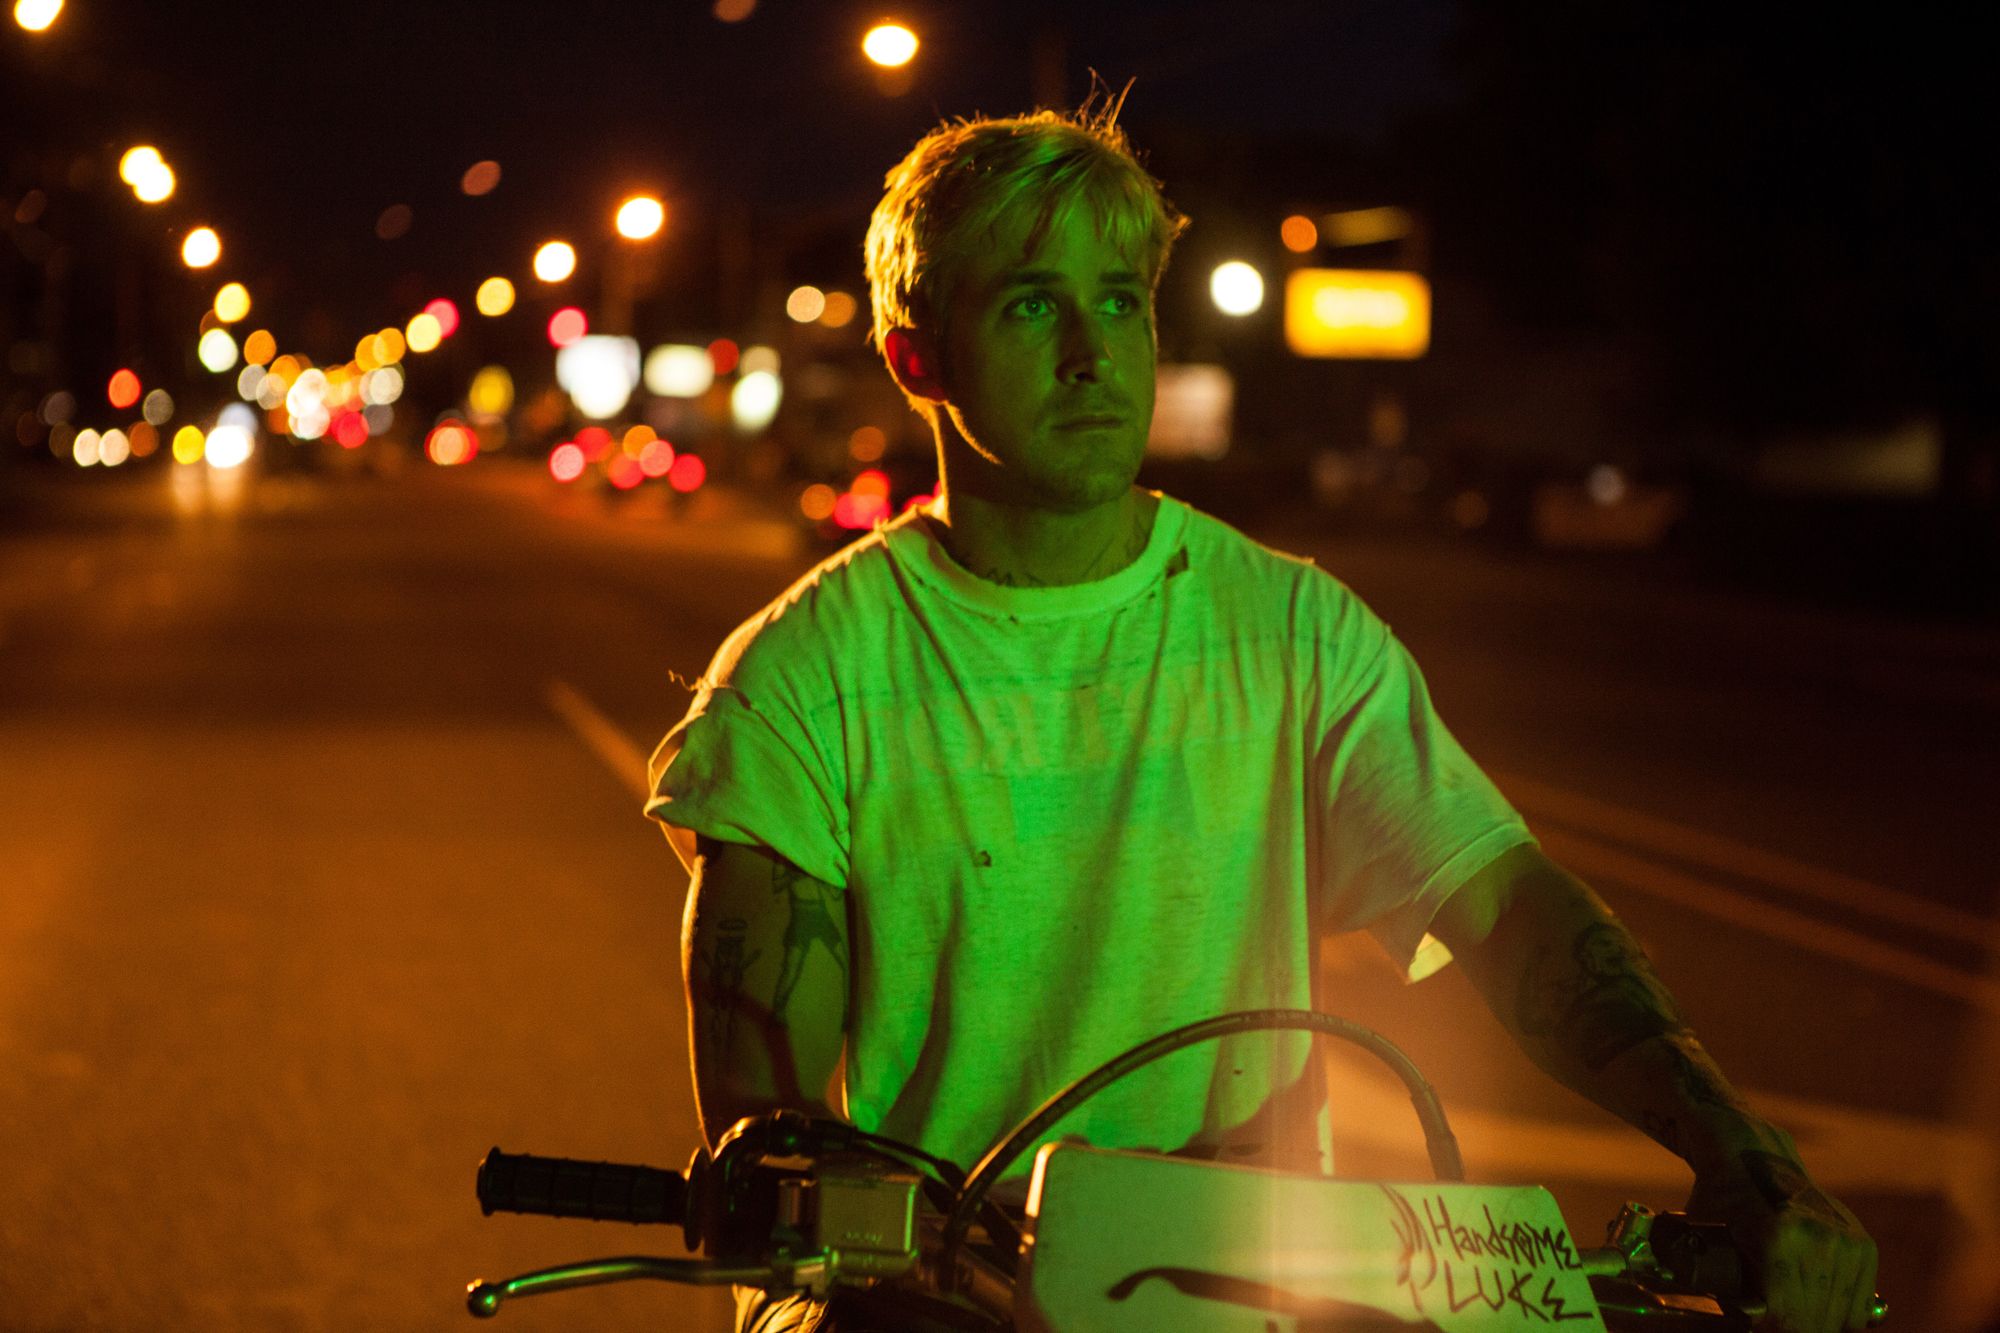 THE PLACE BEYOND THE PINES Image. THE PLACE BEYOND THE PINES Stars Ryan Gosling